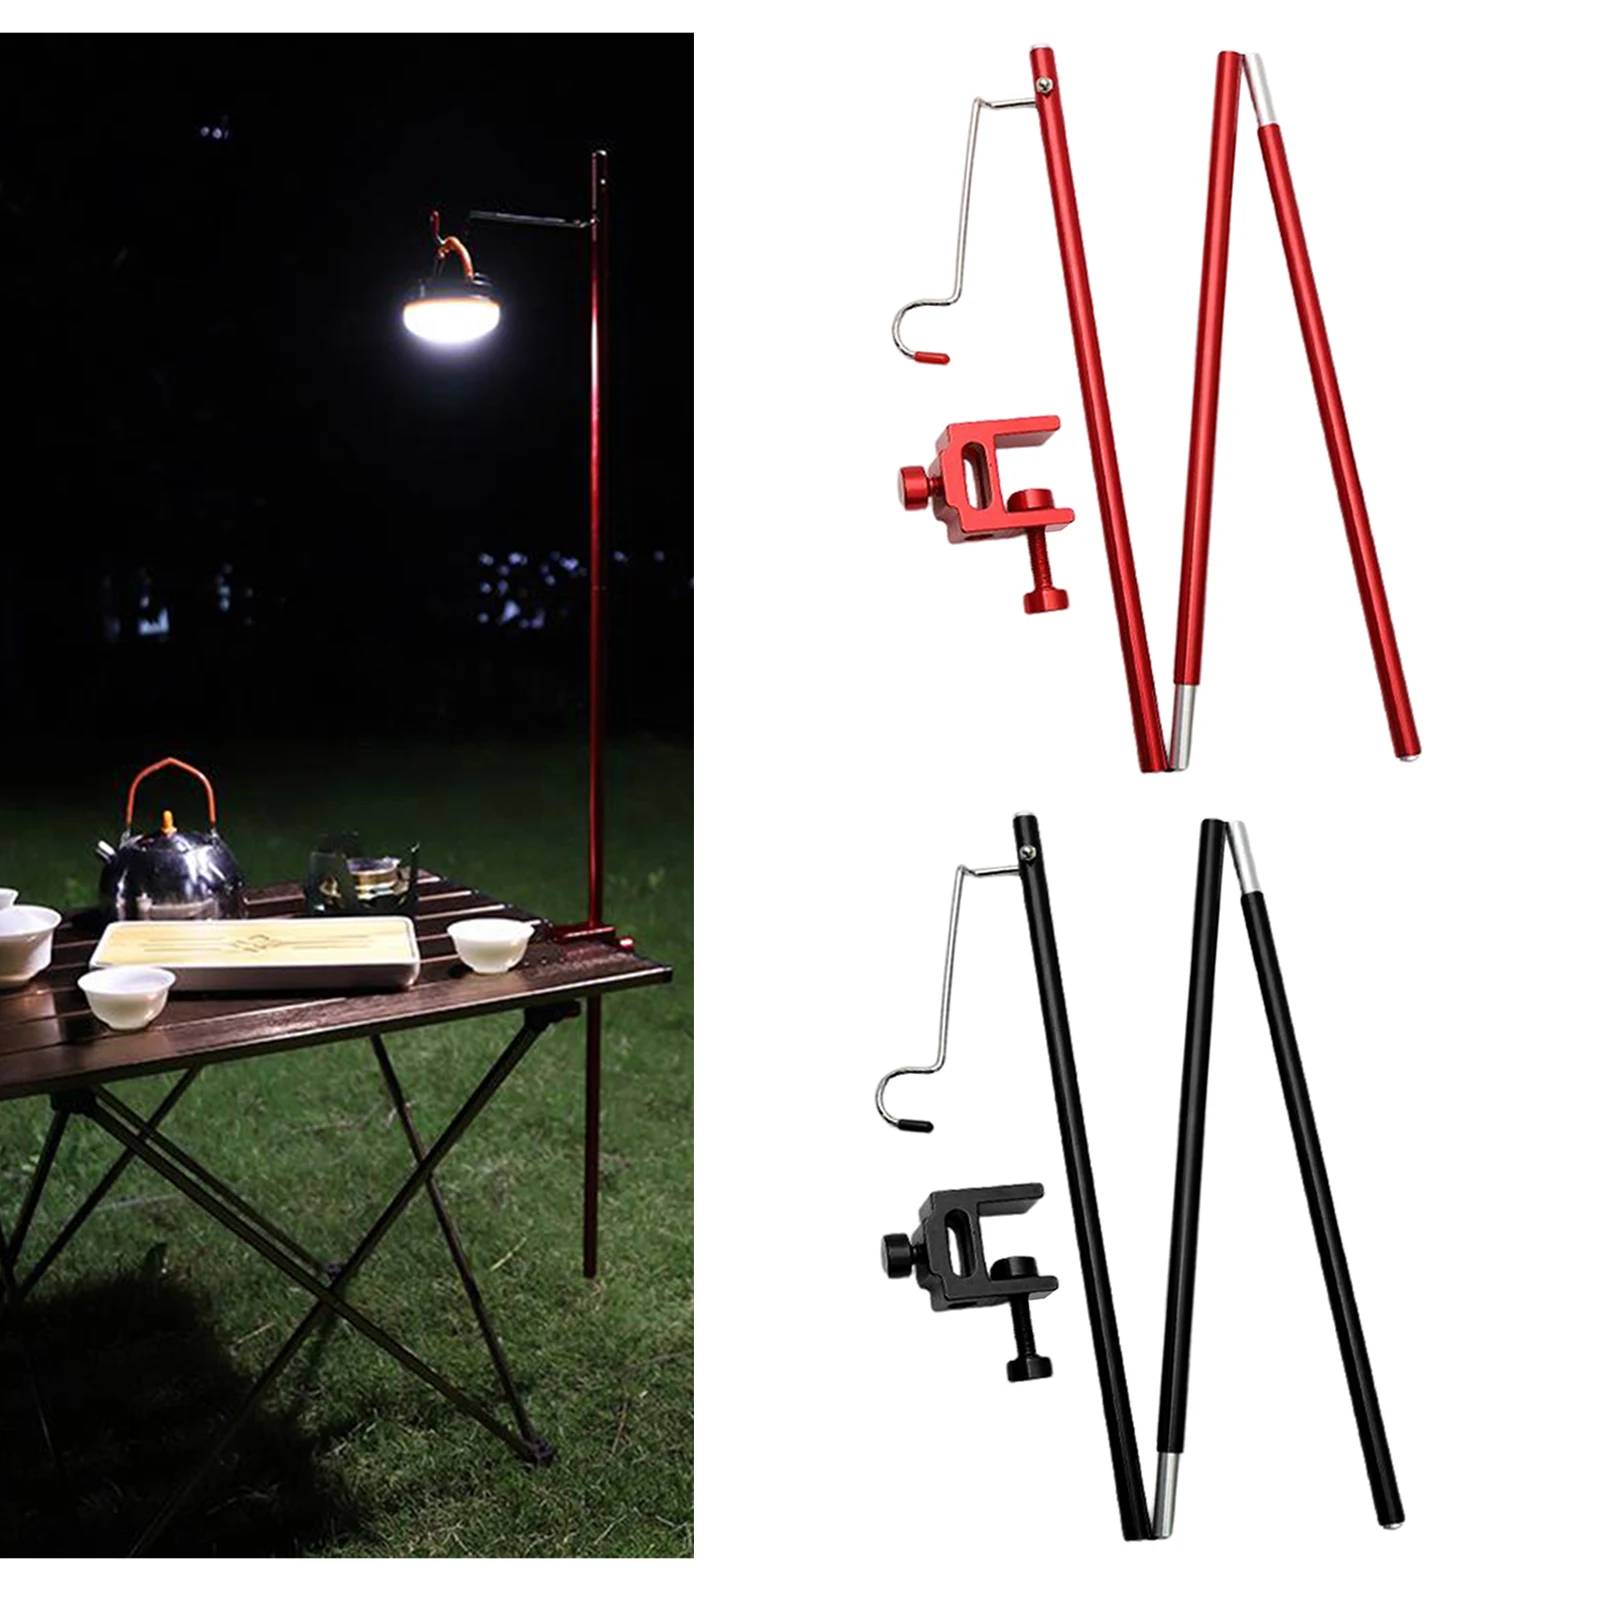 Garden Camping Tent Light Support Rod & Table Clip Holder for Hiking Fishing